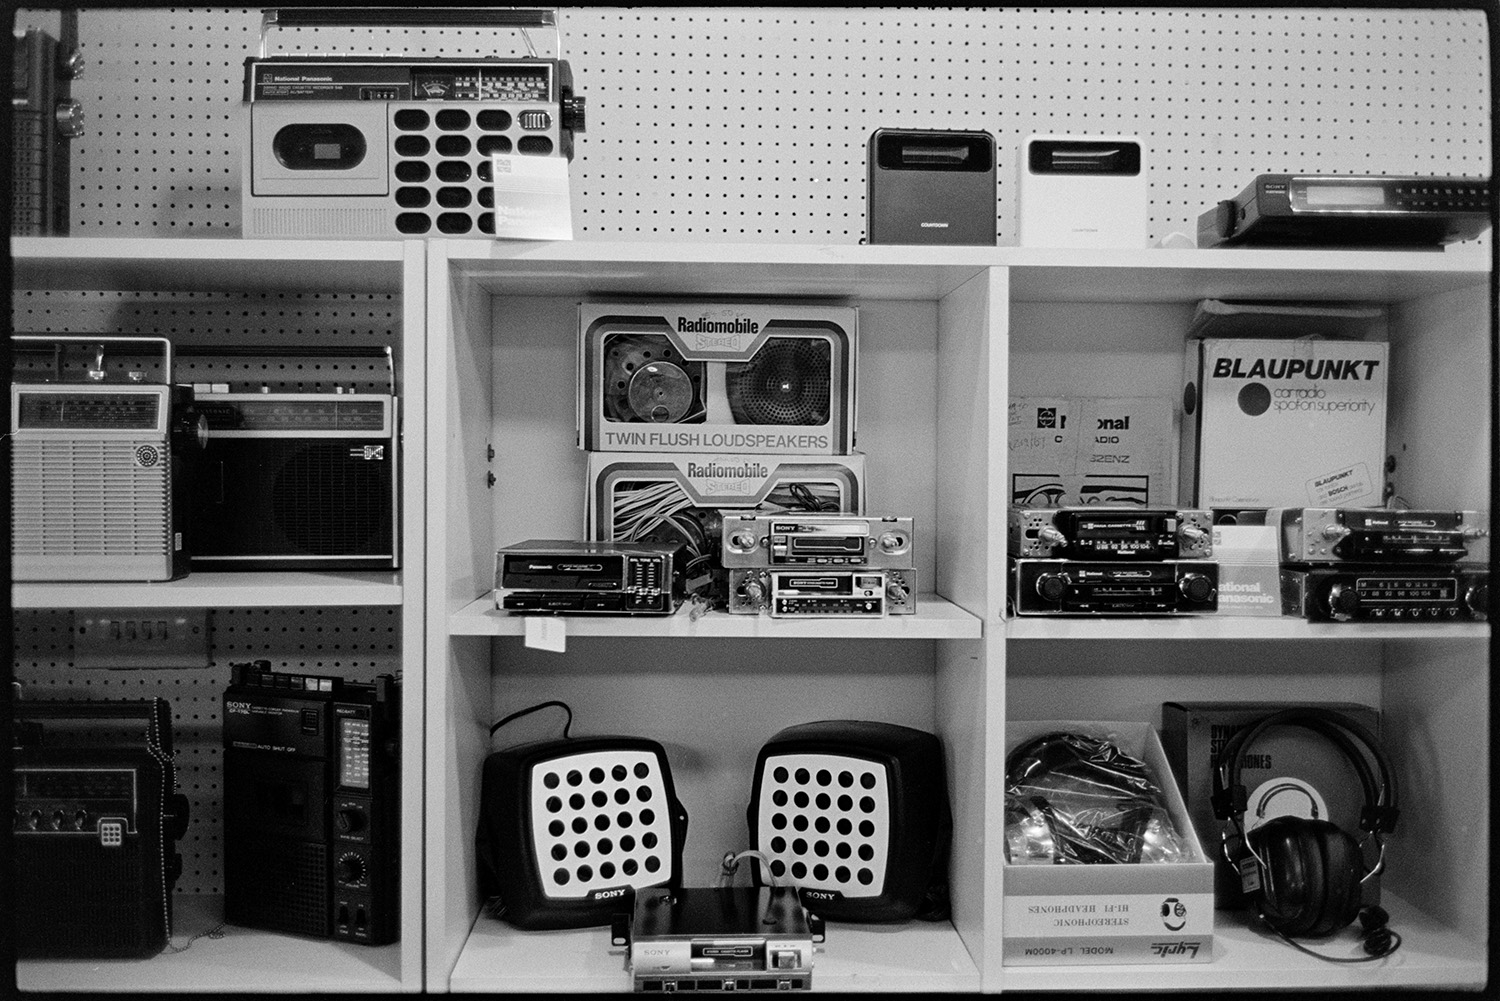 Goods on shelf in Radio, Hi Fi and television shop. 
[The interior of J P Williams electrical shop in South Molton. Radios, tape recorders, speakers and headphones are on display amongst other items,]